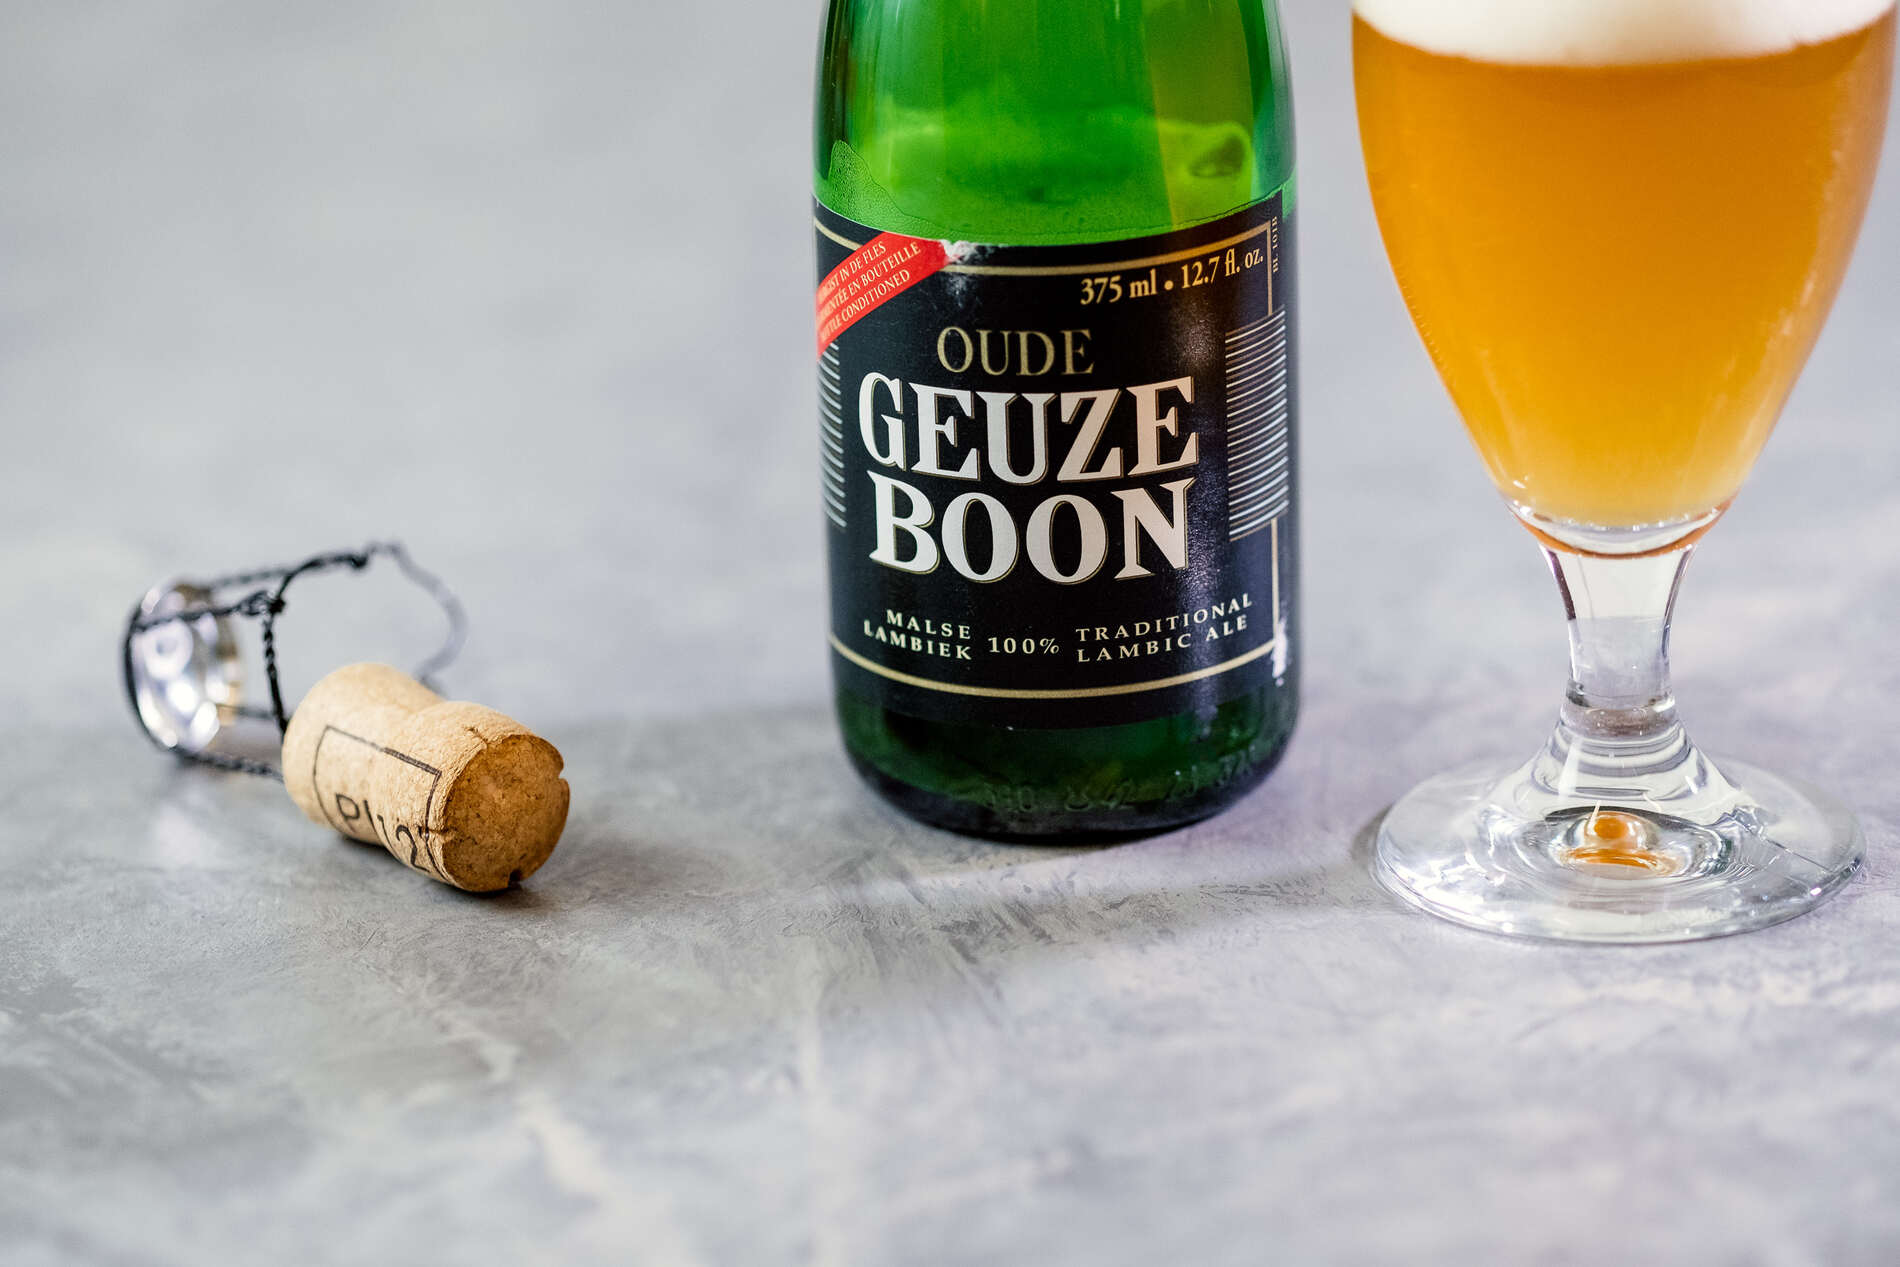 Gueuze by Boon